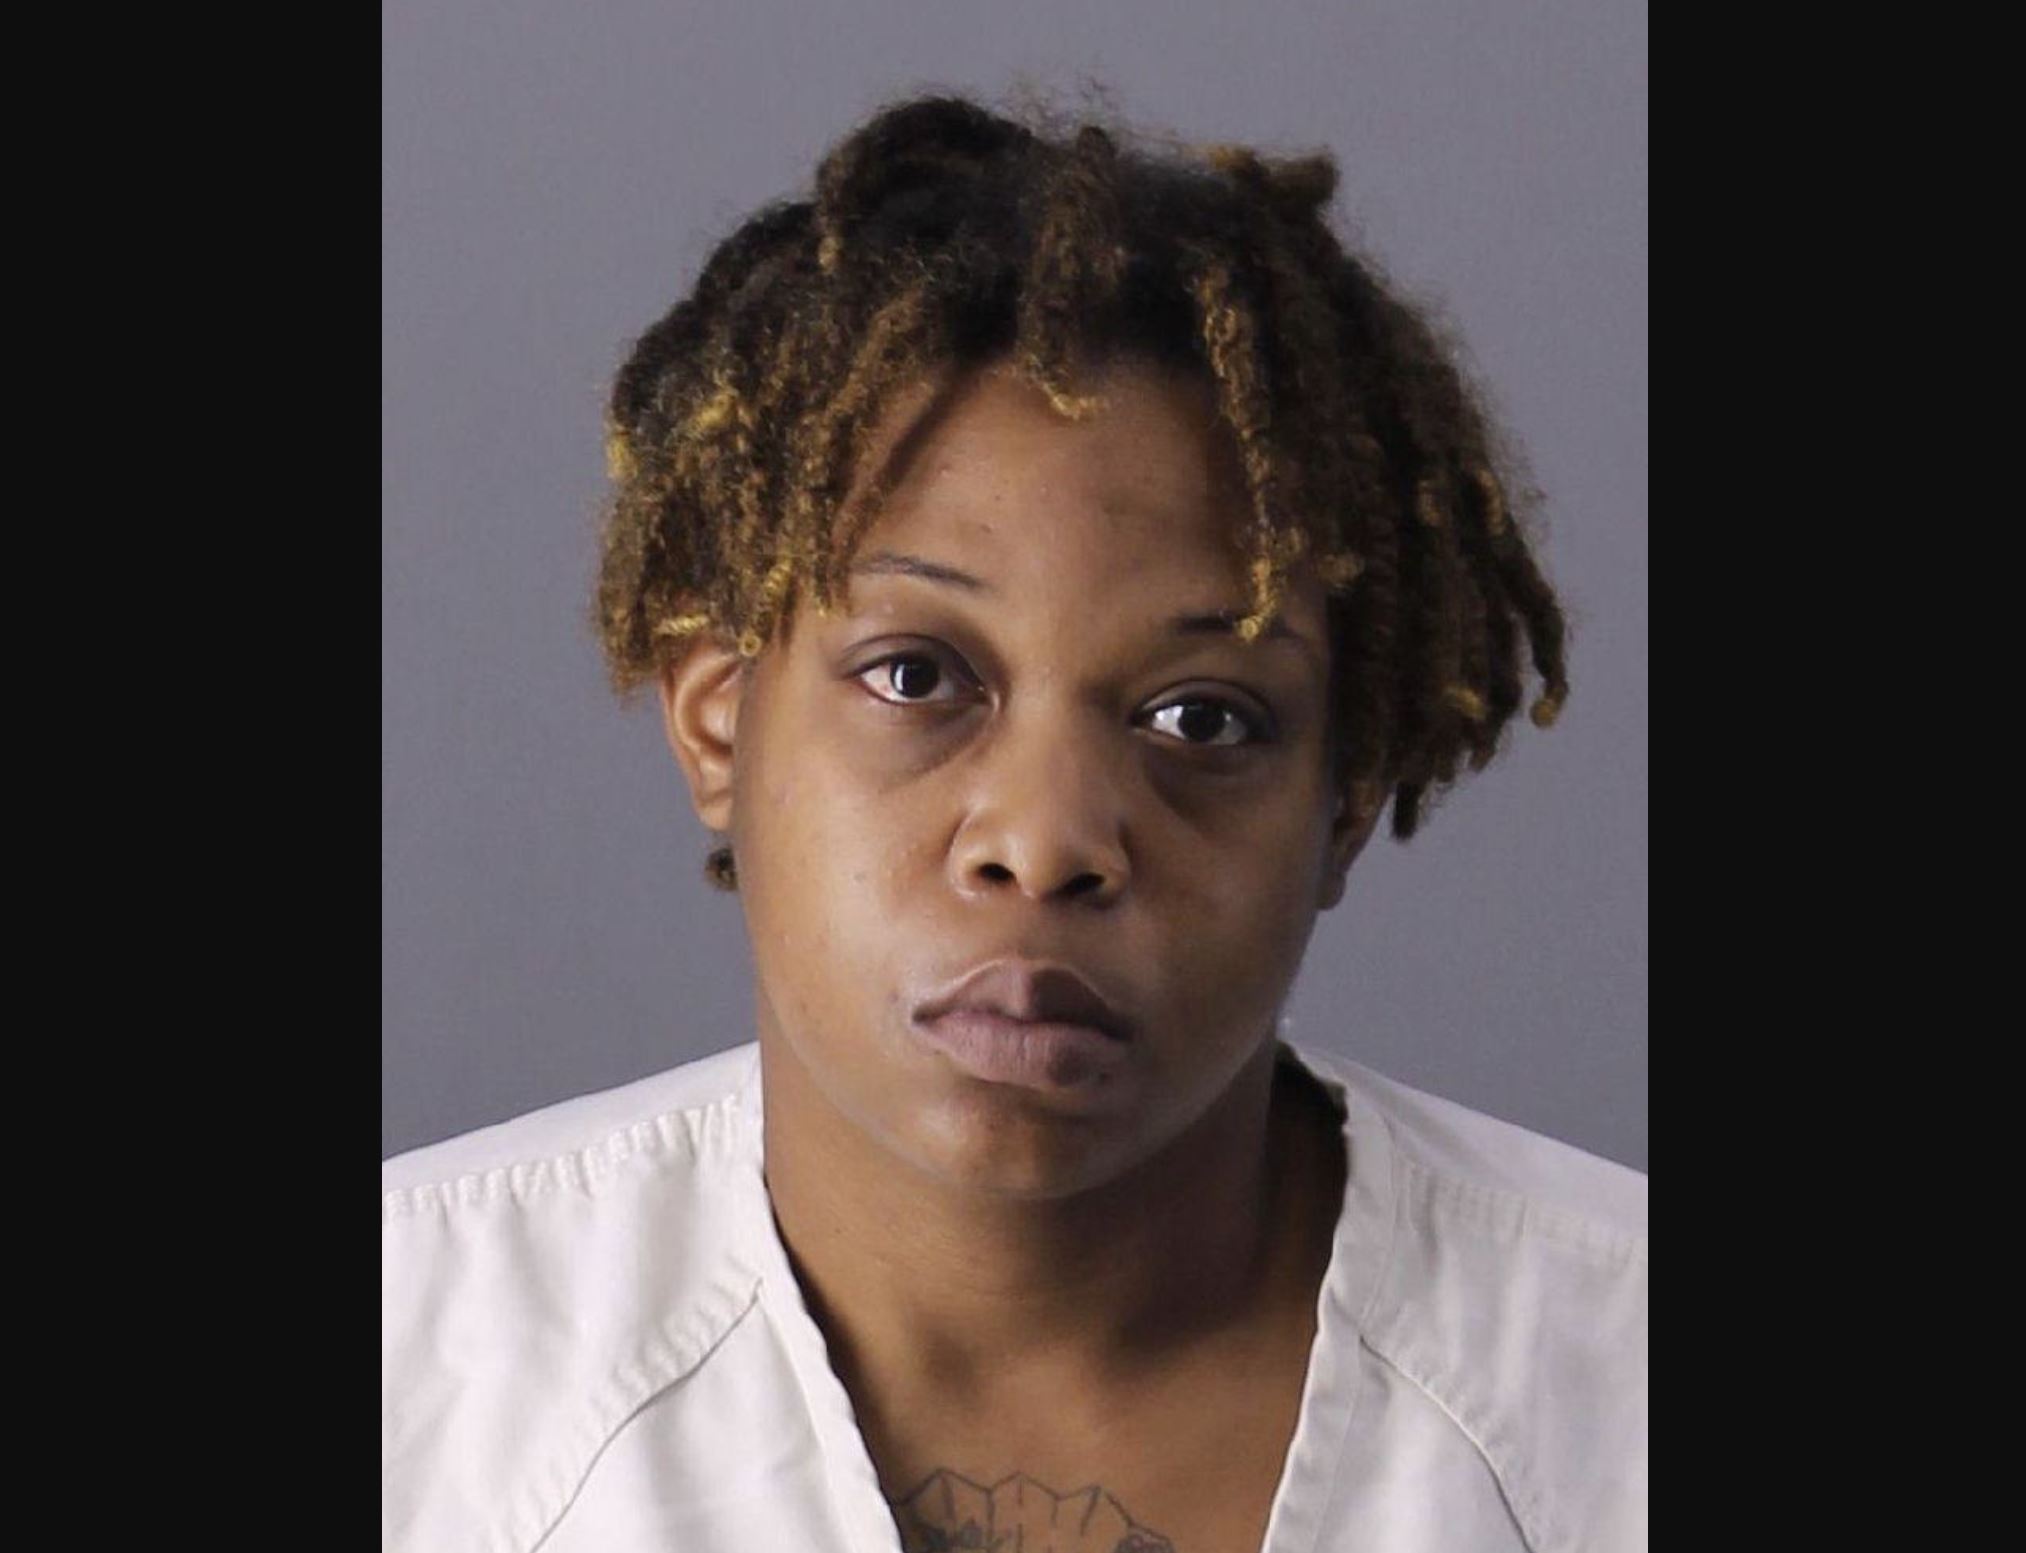 Birmingham mother charged with setting fire to infant's body